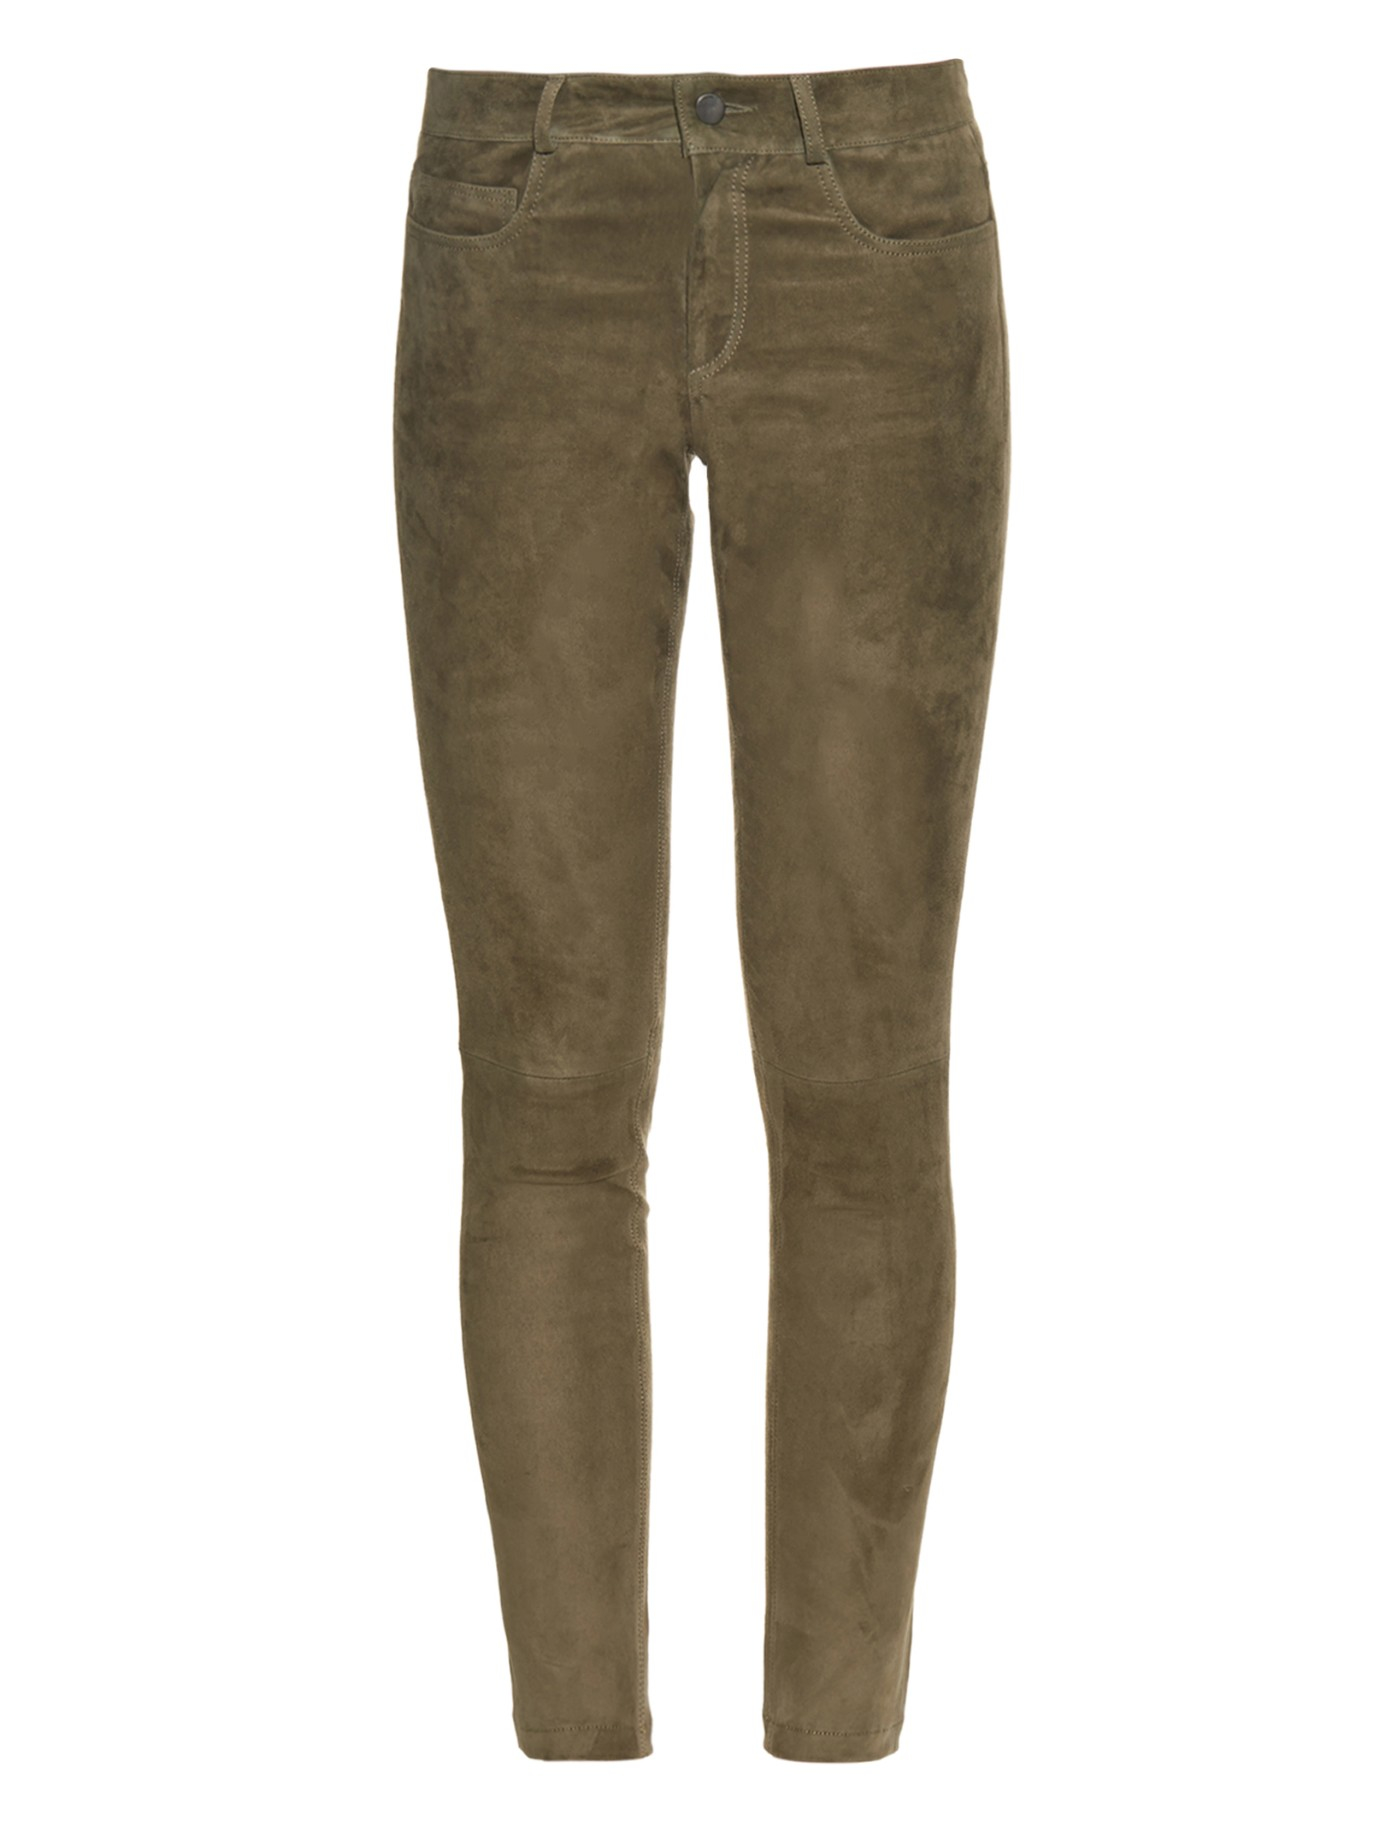 Lyst - Joseph Jeanie Suede Pants in Natural